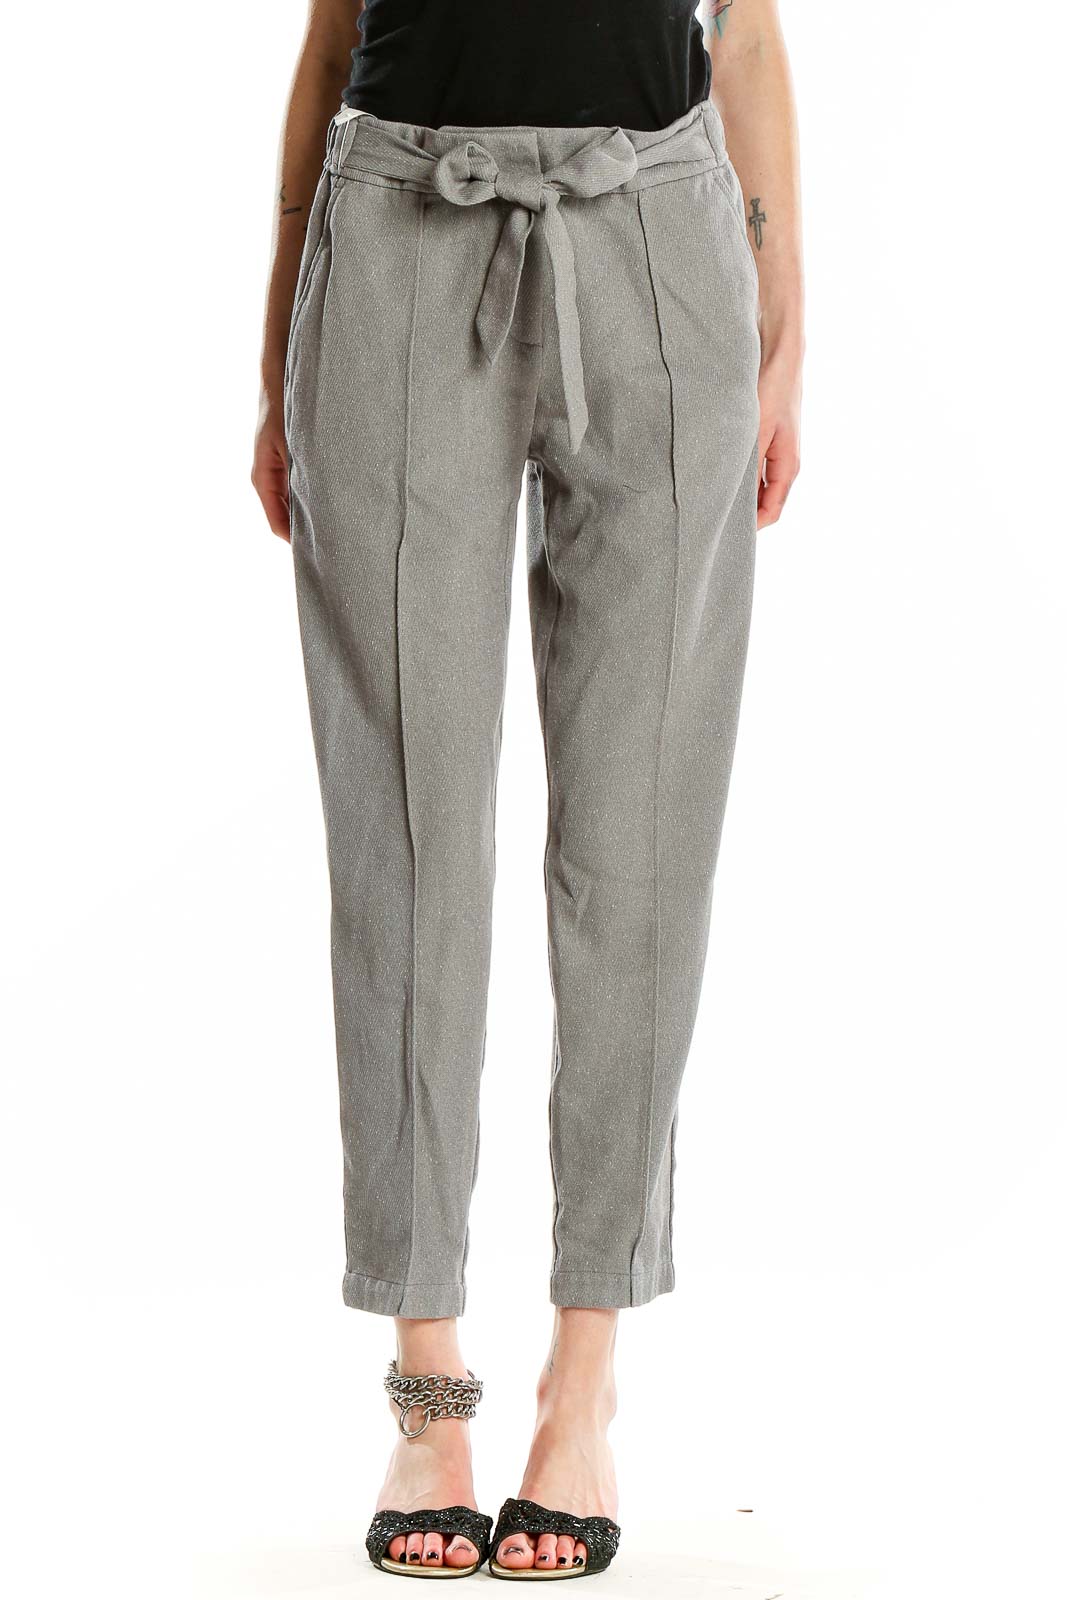 Grey Waist Tie Tapered Pants Front